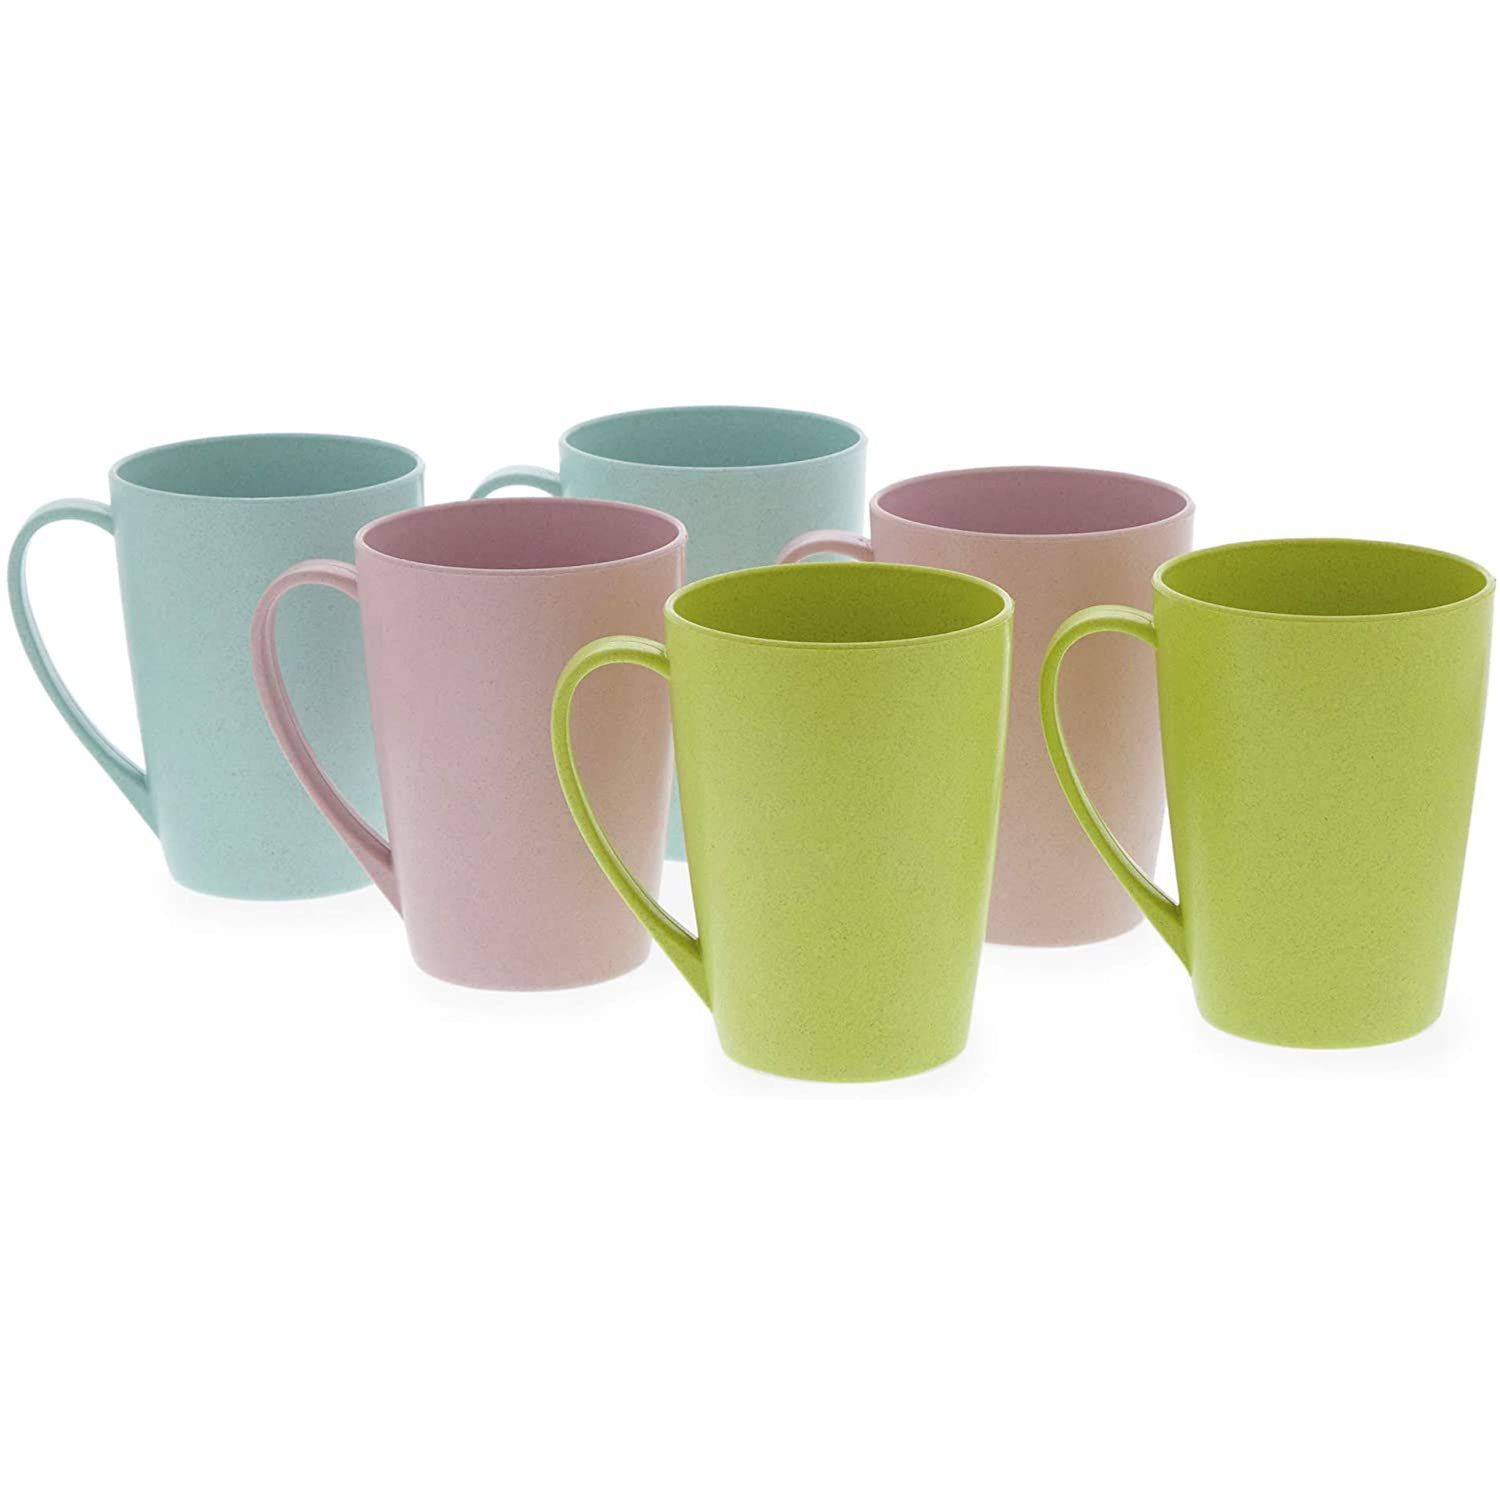 Unbreakable Wheat Straw Mugs with Handle, Set of 6 Reusable Plastic Coffee  Cups (3 Colors, 15 oz)